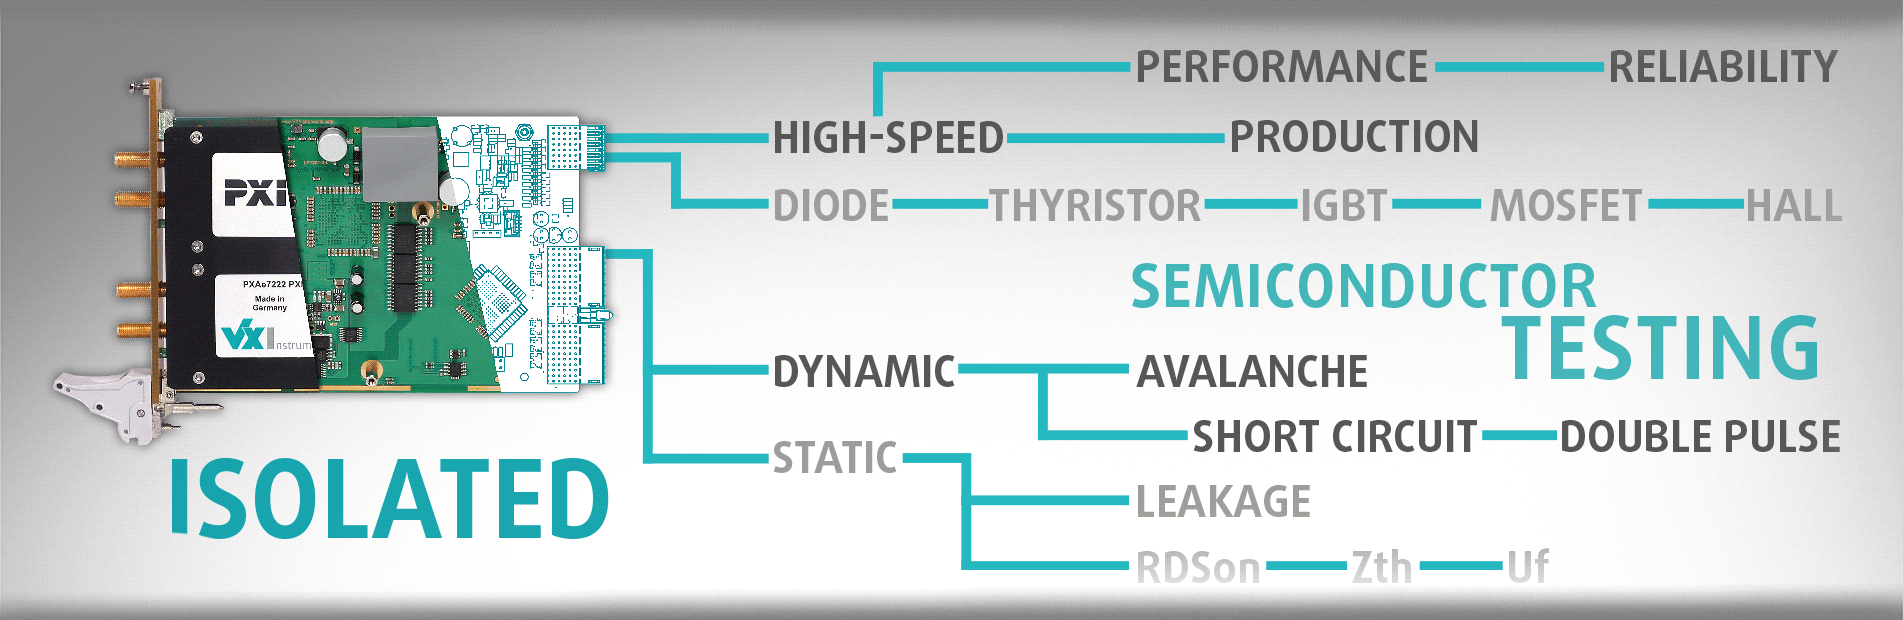 Semiconductor Test Systems